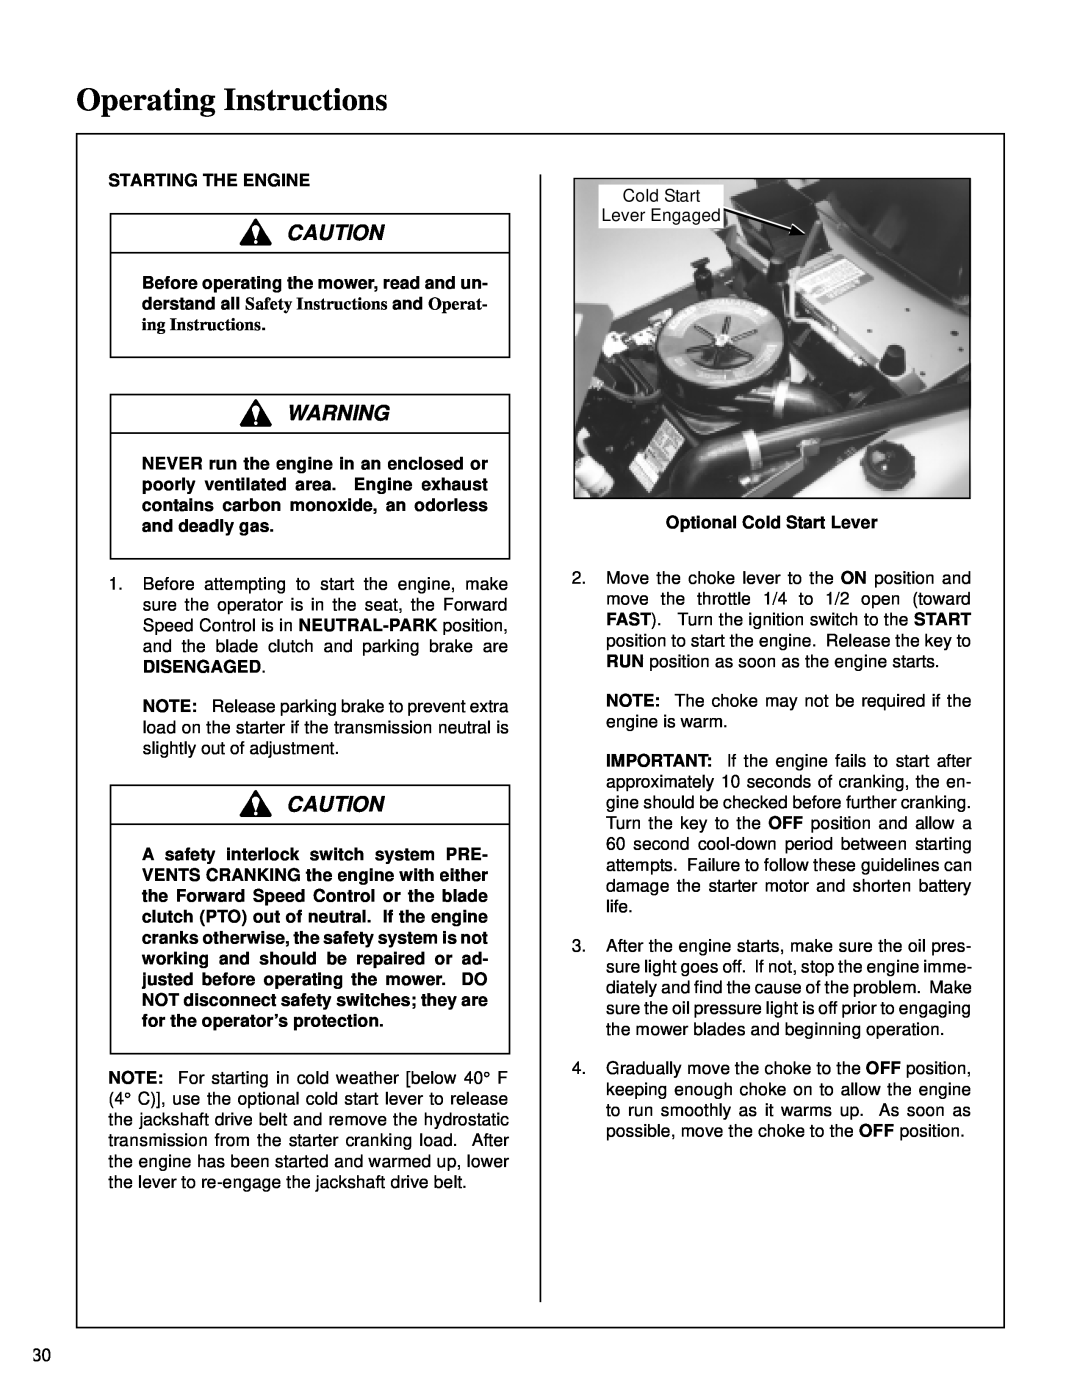 Walker MT owner manual Operating Instructions, Starting The Engine, Disengaged, Optional Cold Start Lever 